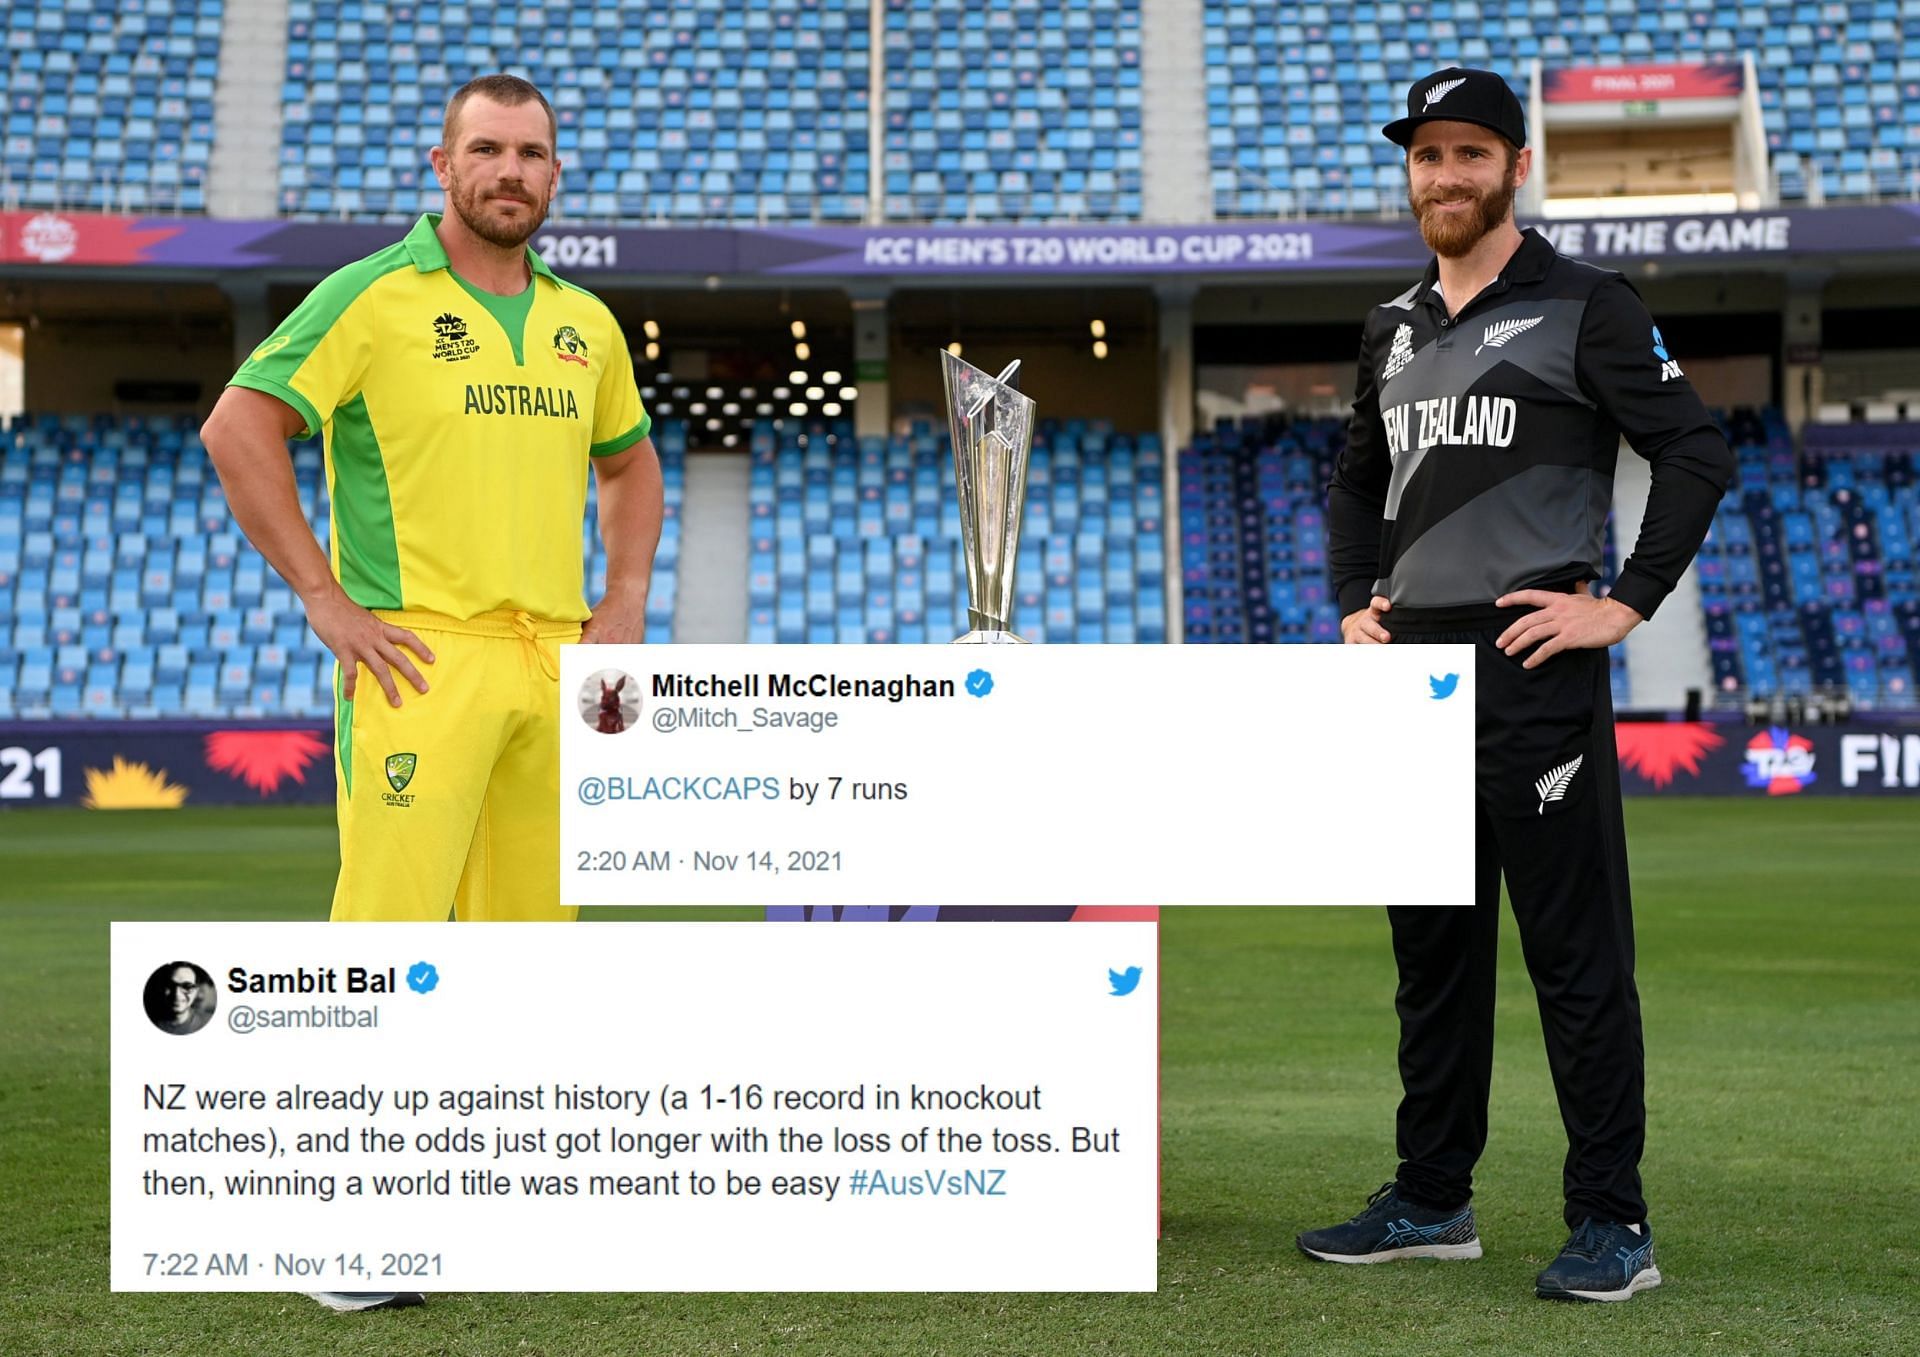 Fans react after Australia win the toss in 2021 T20 World Cup final against New Zealand